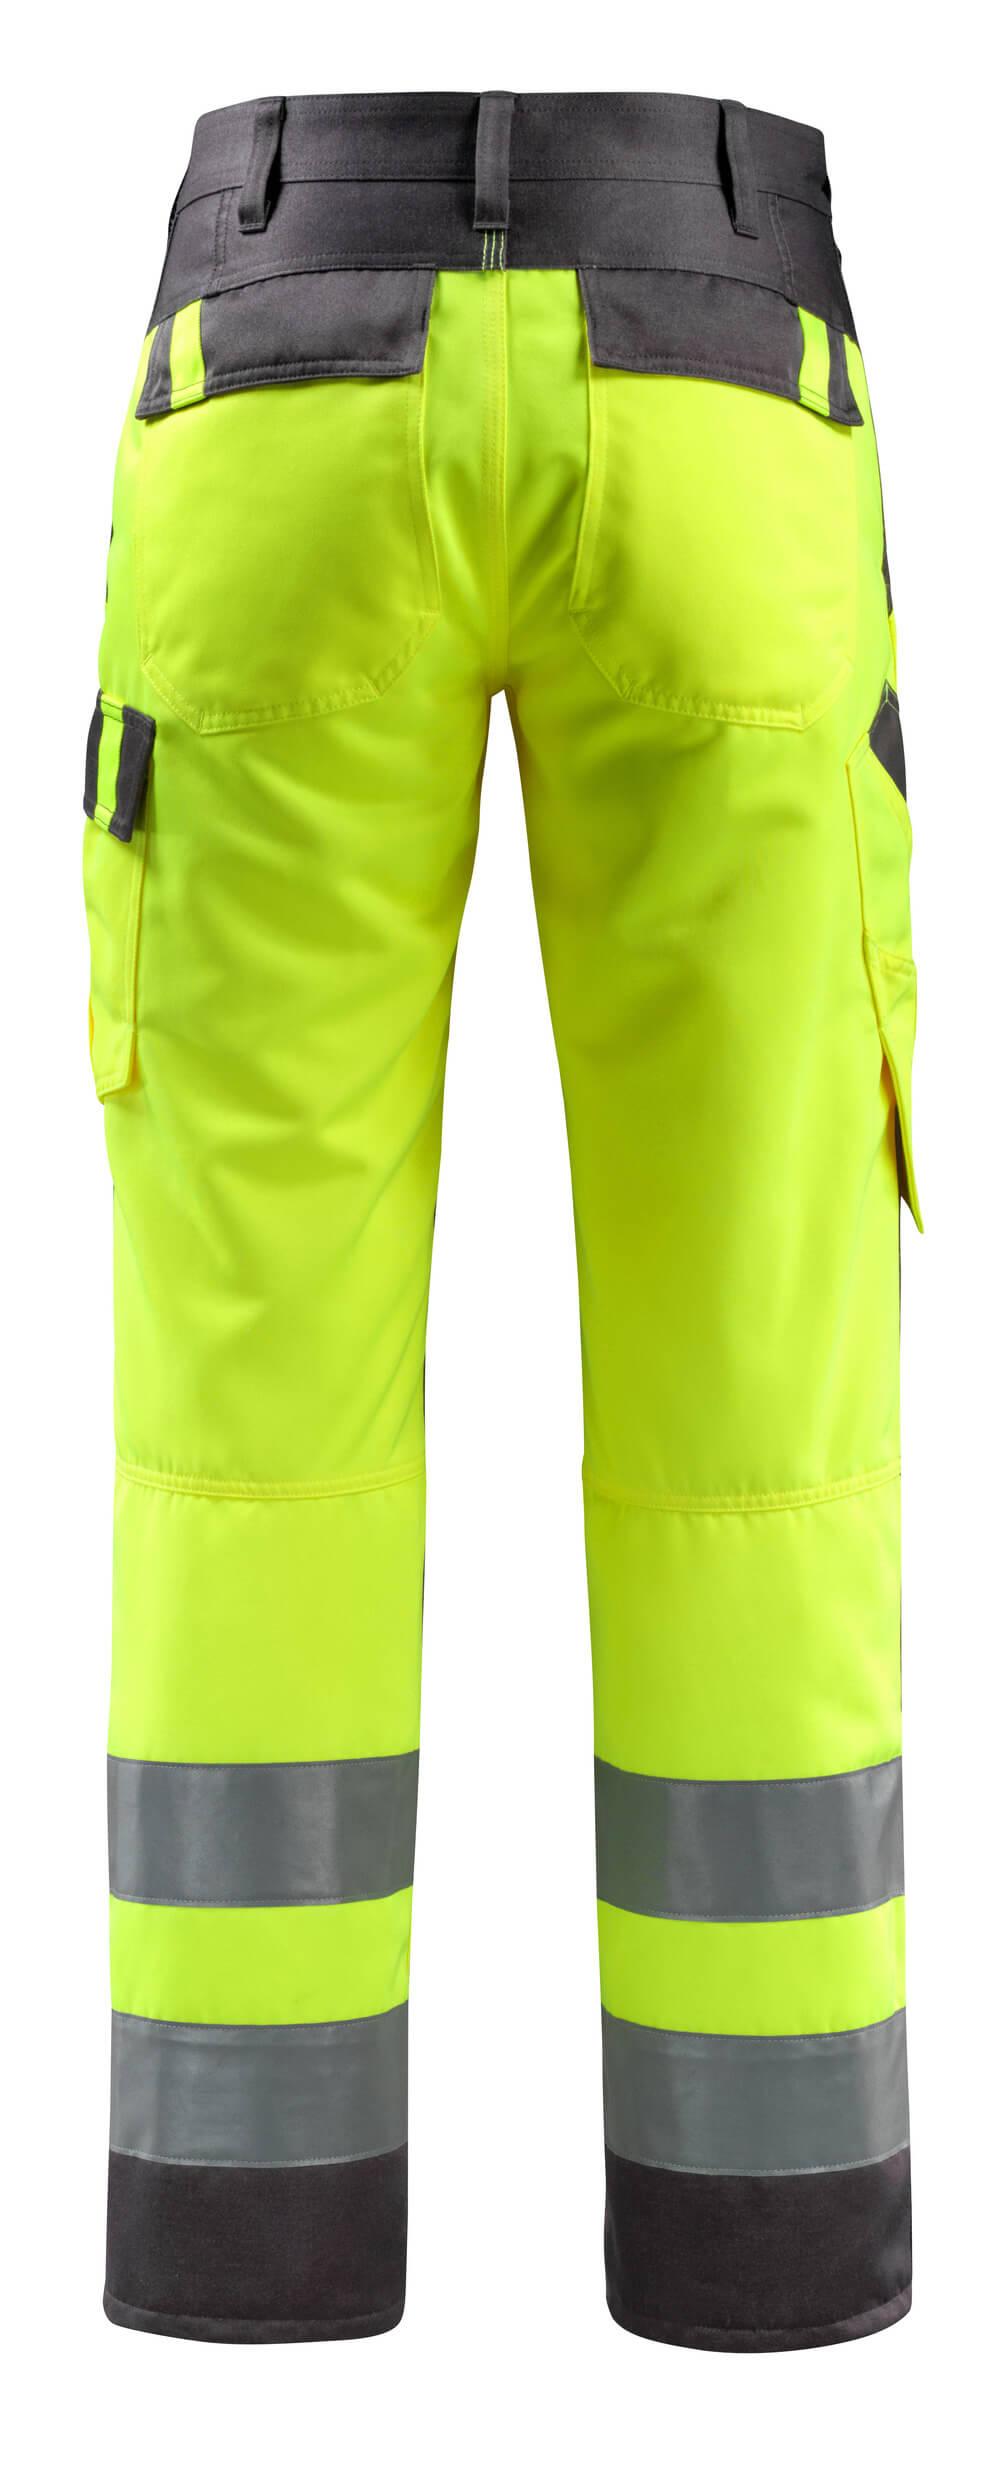 Mascot SAFE LIGHT  Maitland Trousers with kneepad pockets 15979 hi-vis yellow/dark anthracite